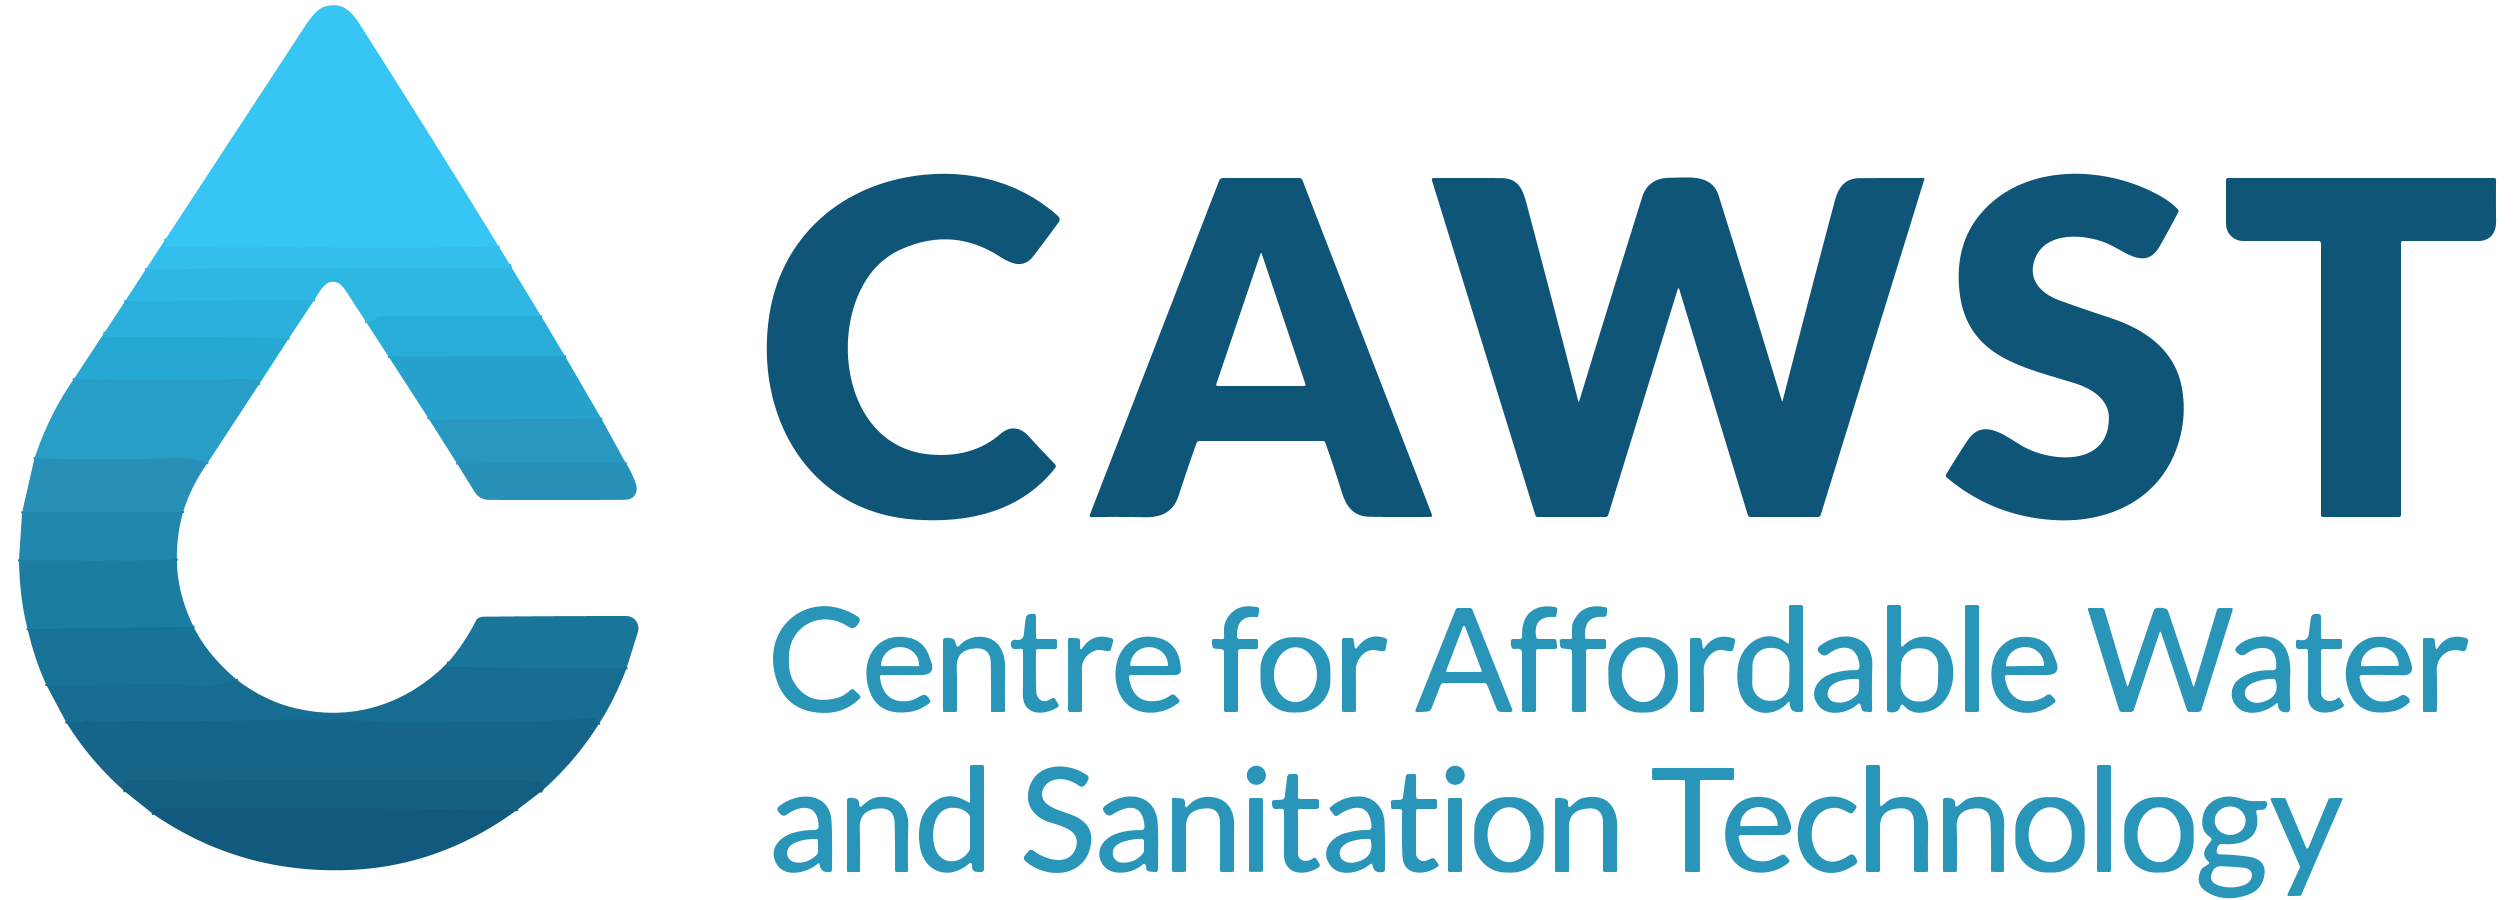 Logo for Centre for Affordable Water and Sanitation Technology on a transparent background